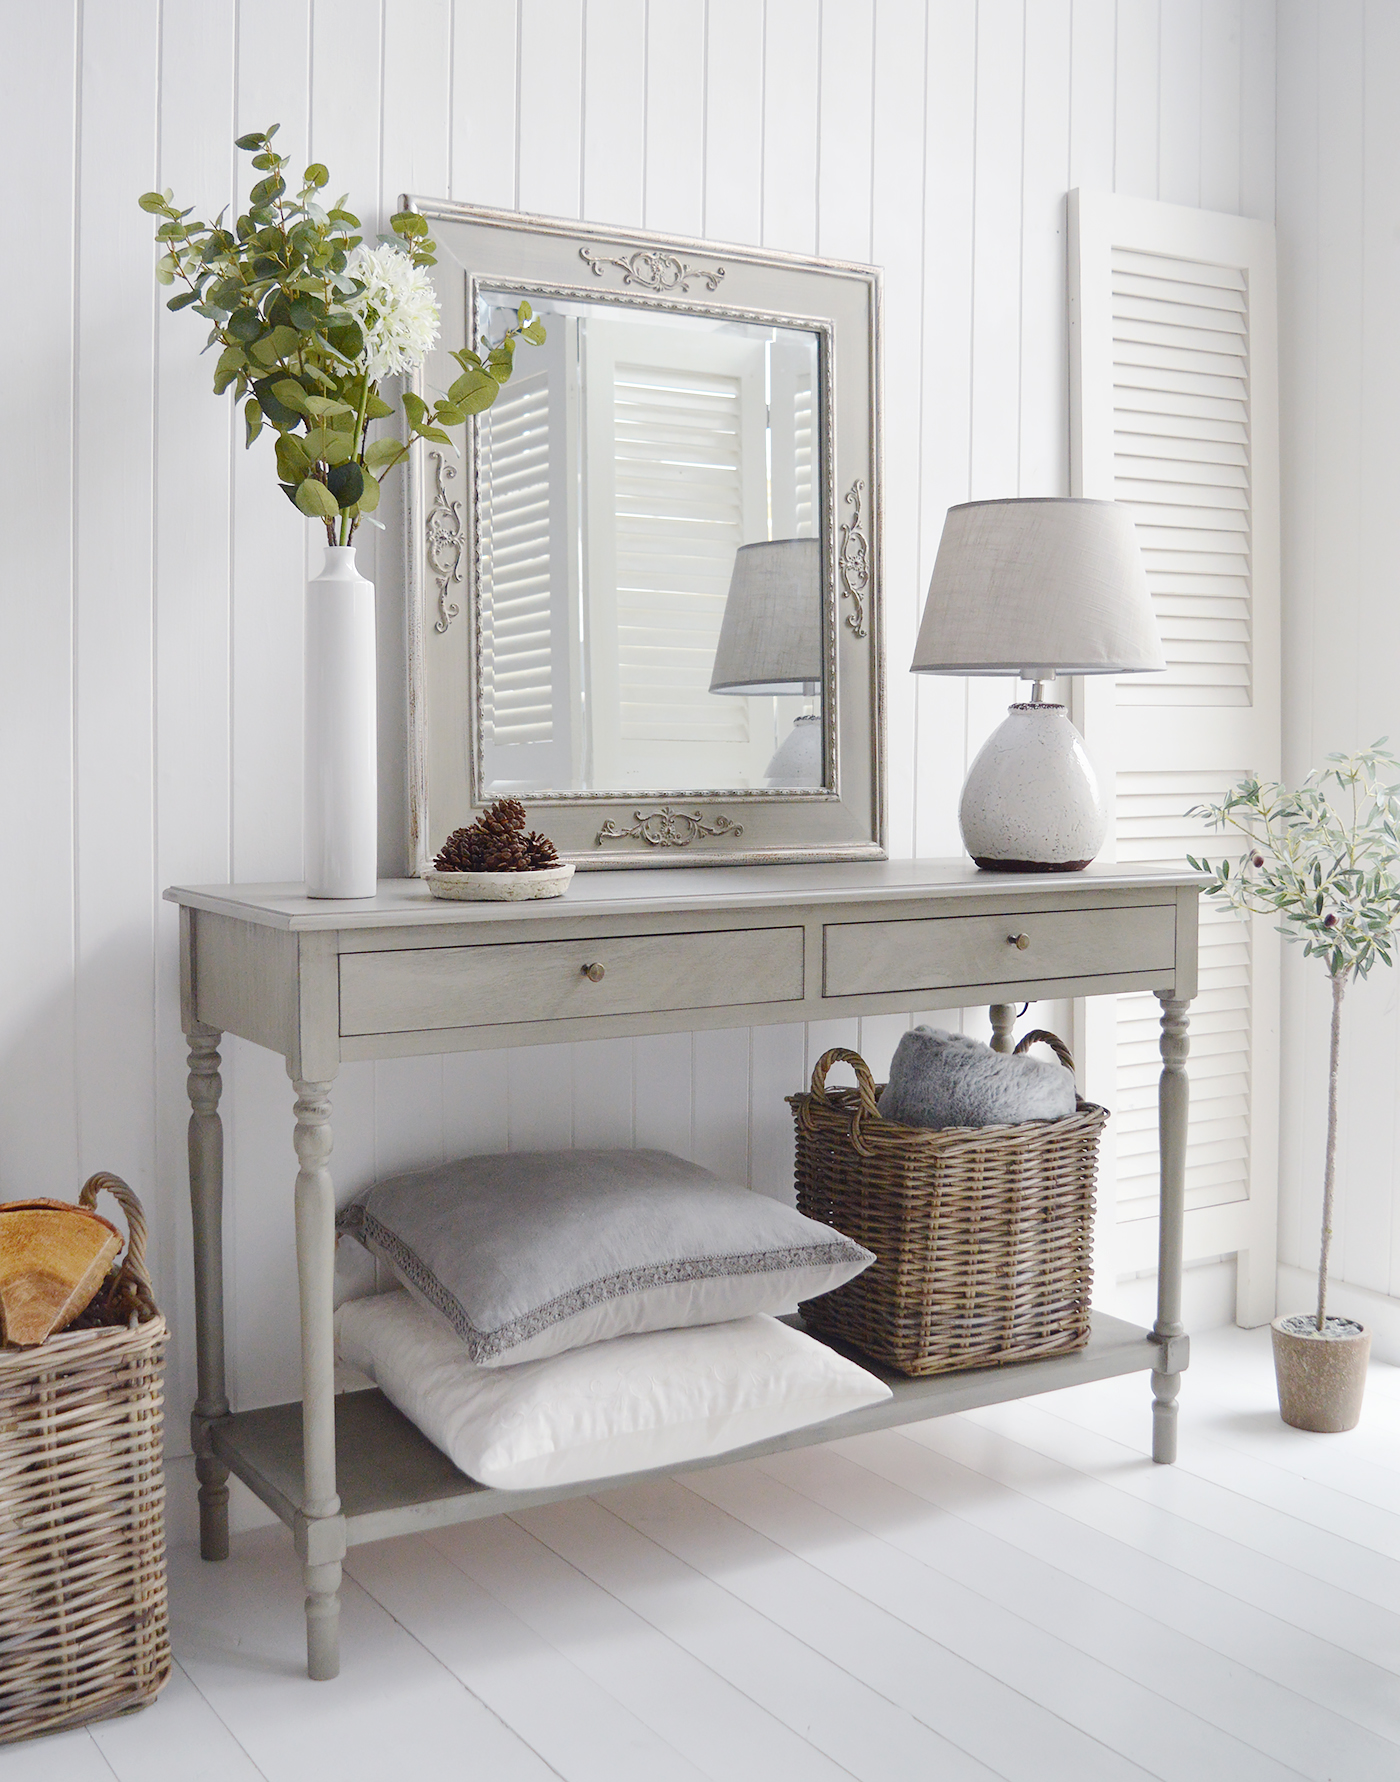 Vermont Wall Mirror with The Sudbury console table for New England style hallway in country and coastal homes